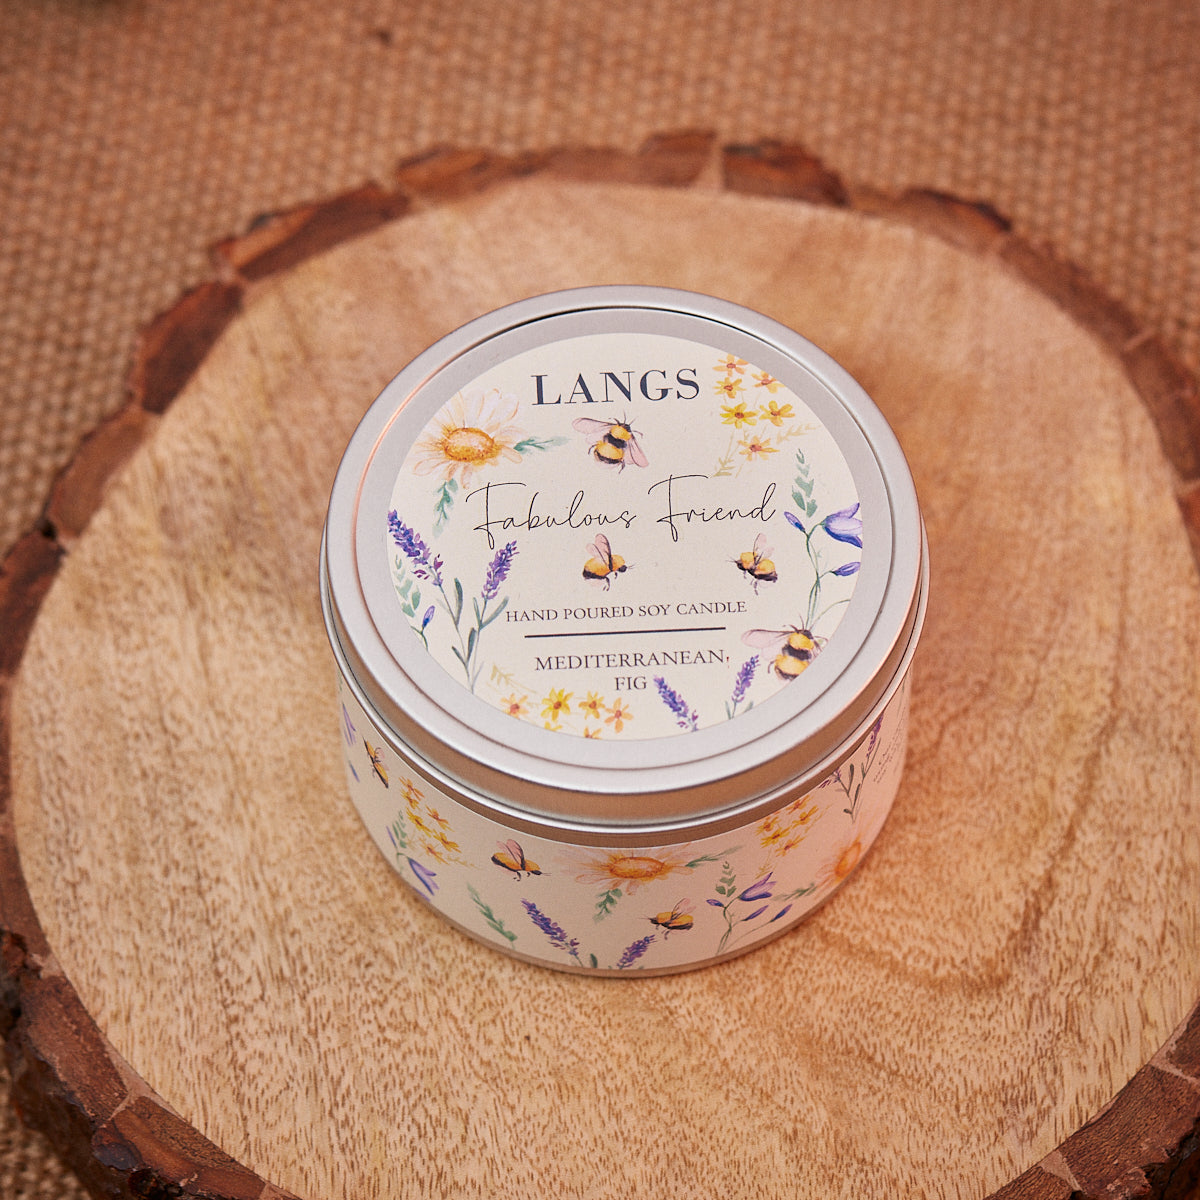 Fabulous Friend Hand Poured Soy Candle